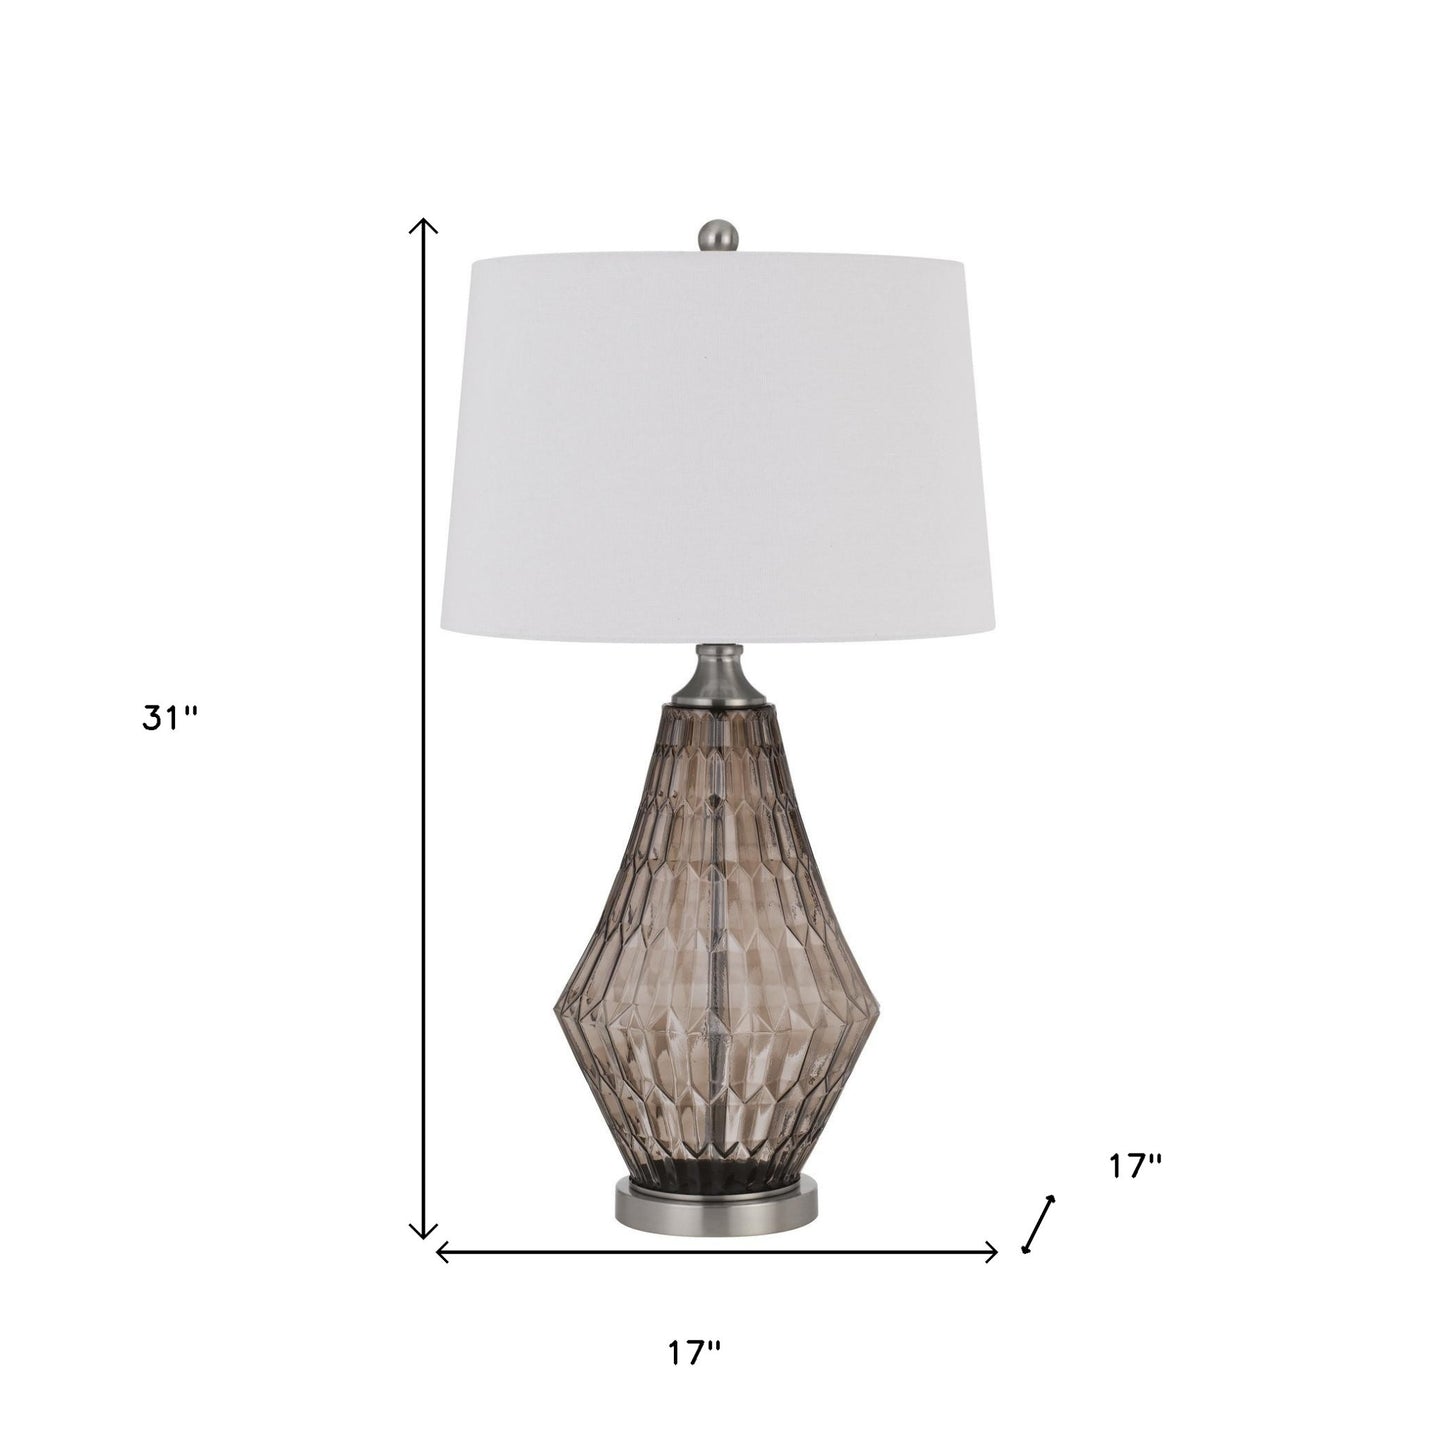 31" Gray Metal Geometric Table Lamp With Off White Empire Shade